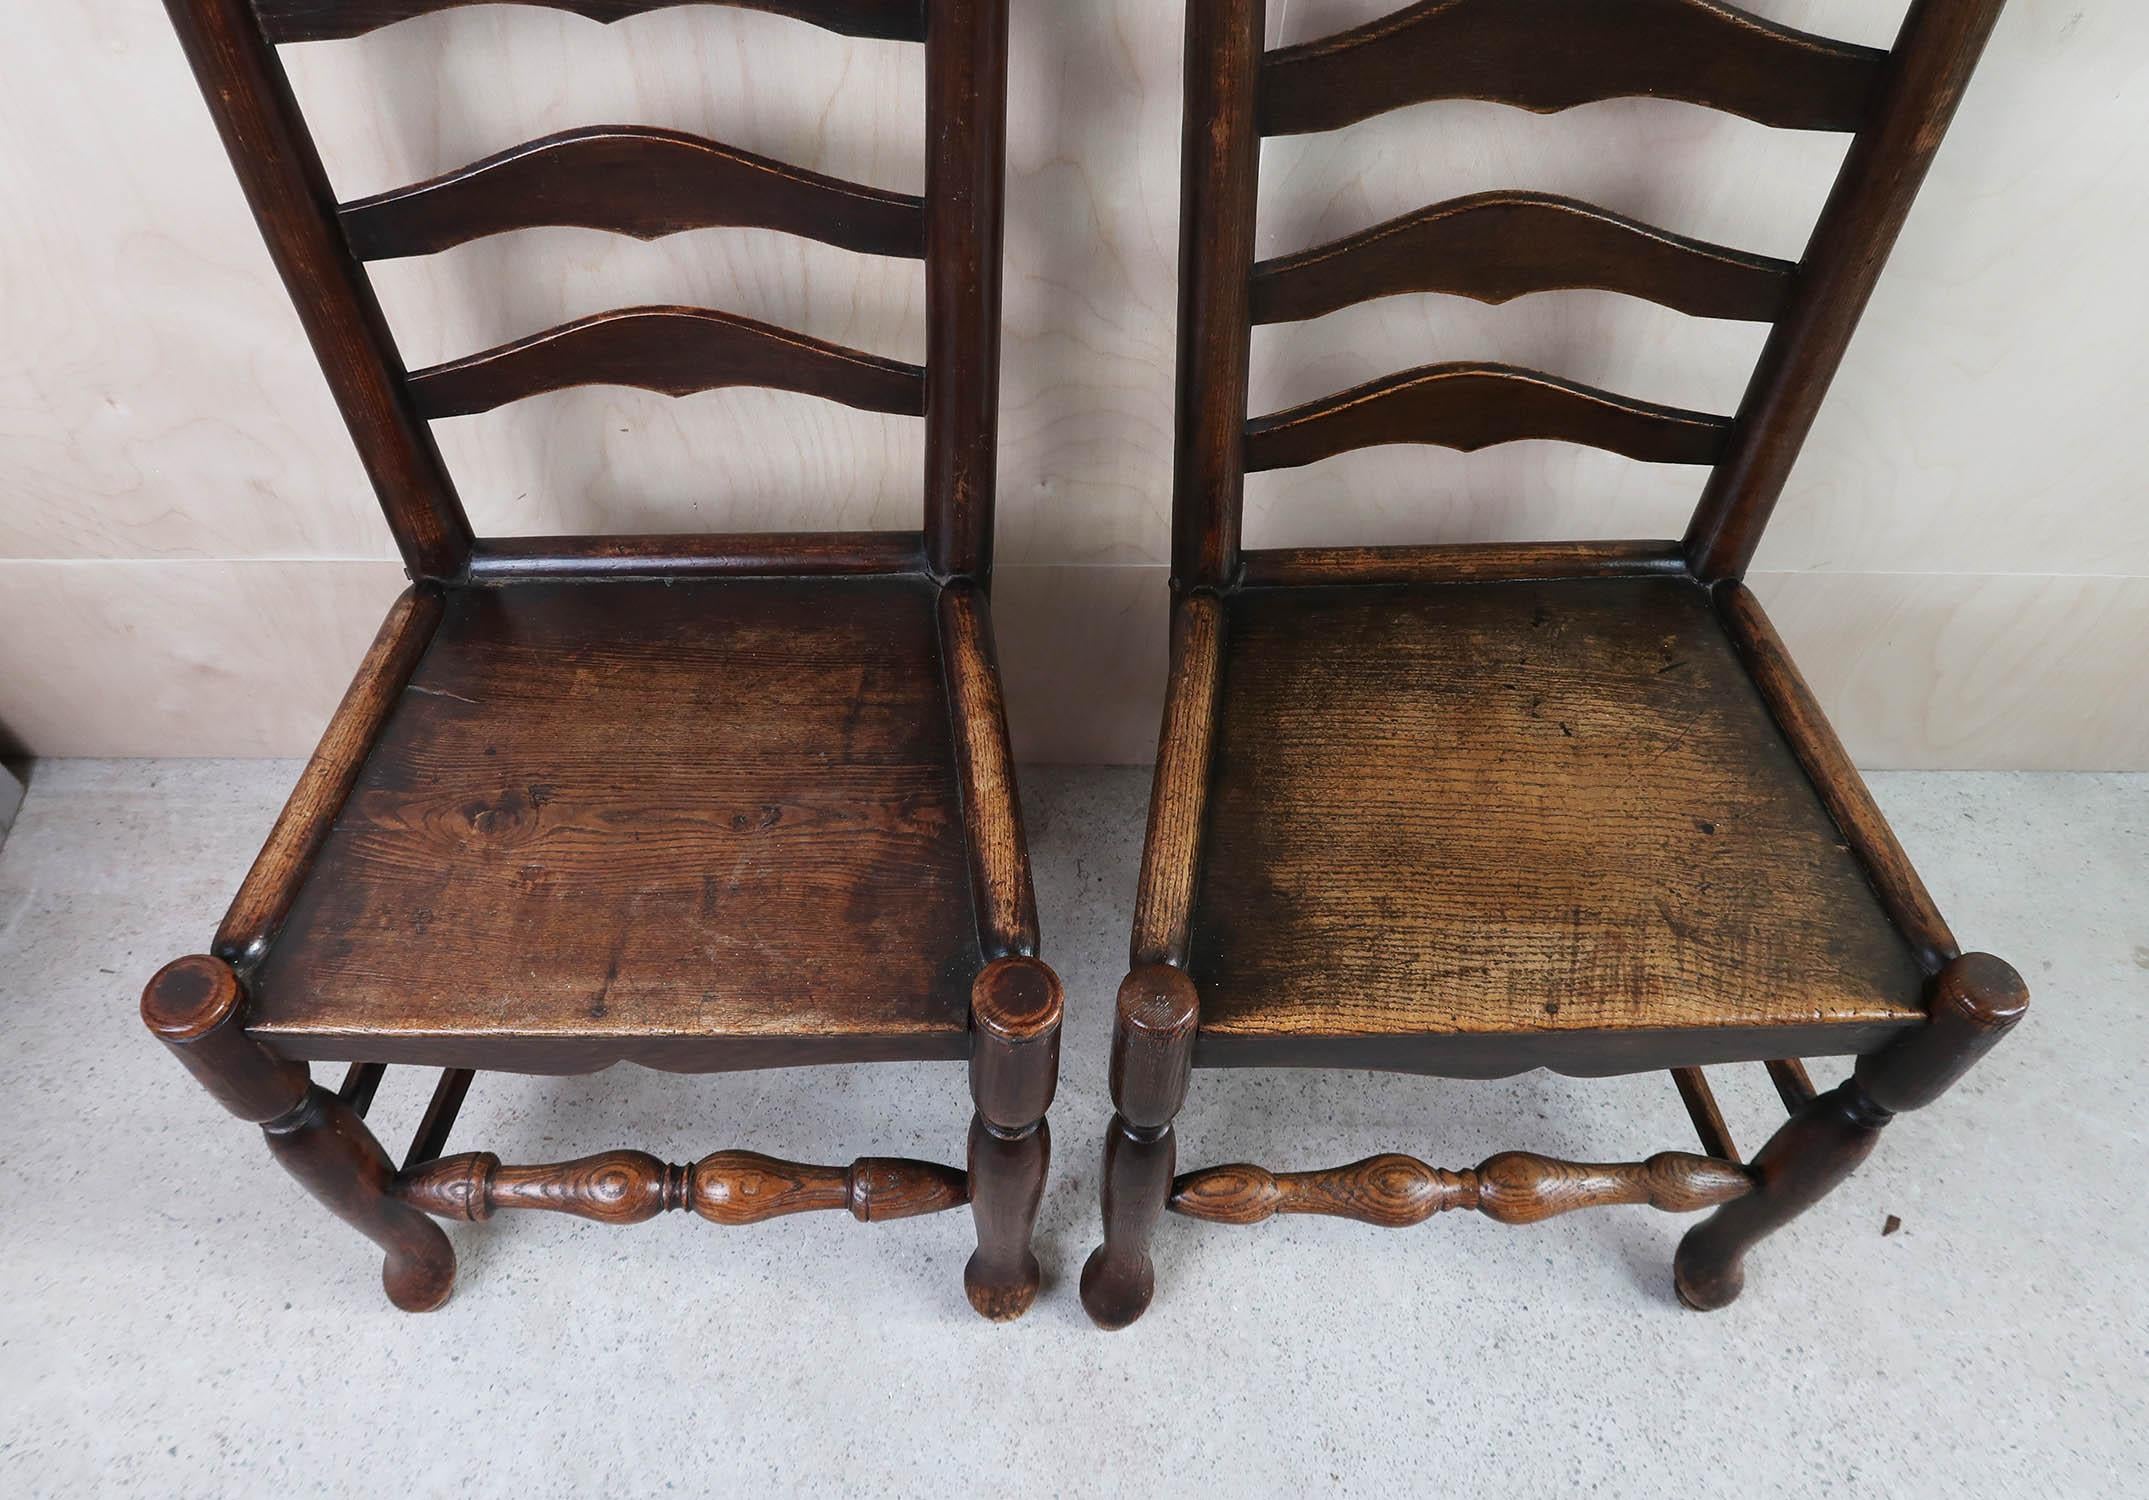 Near Pair of Antique Welsh Country Ladder back Chairs. C.1800 (Walisisch) im Angebot